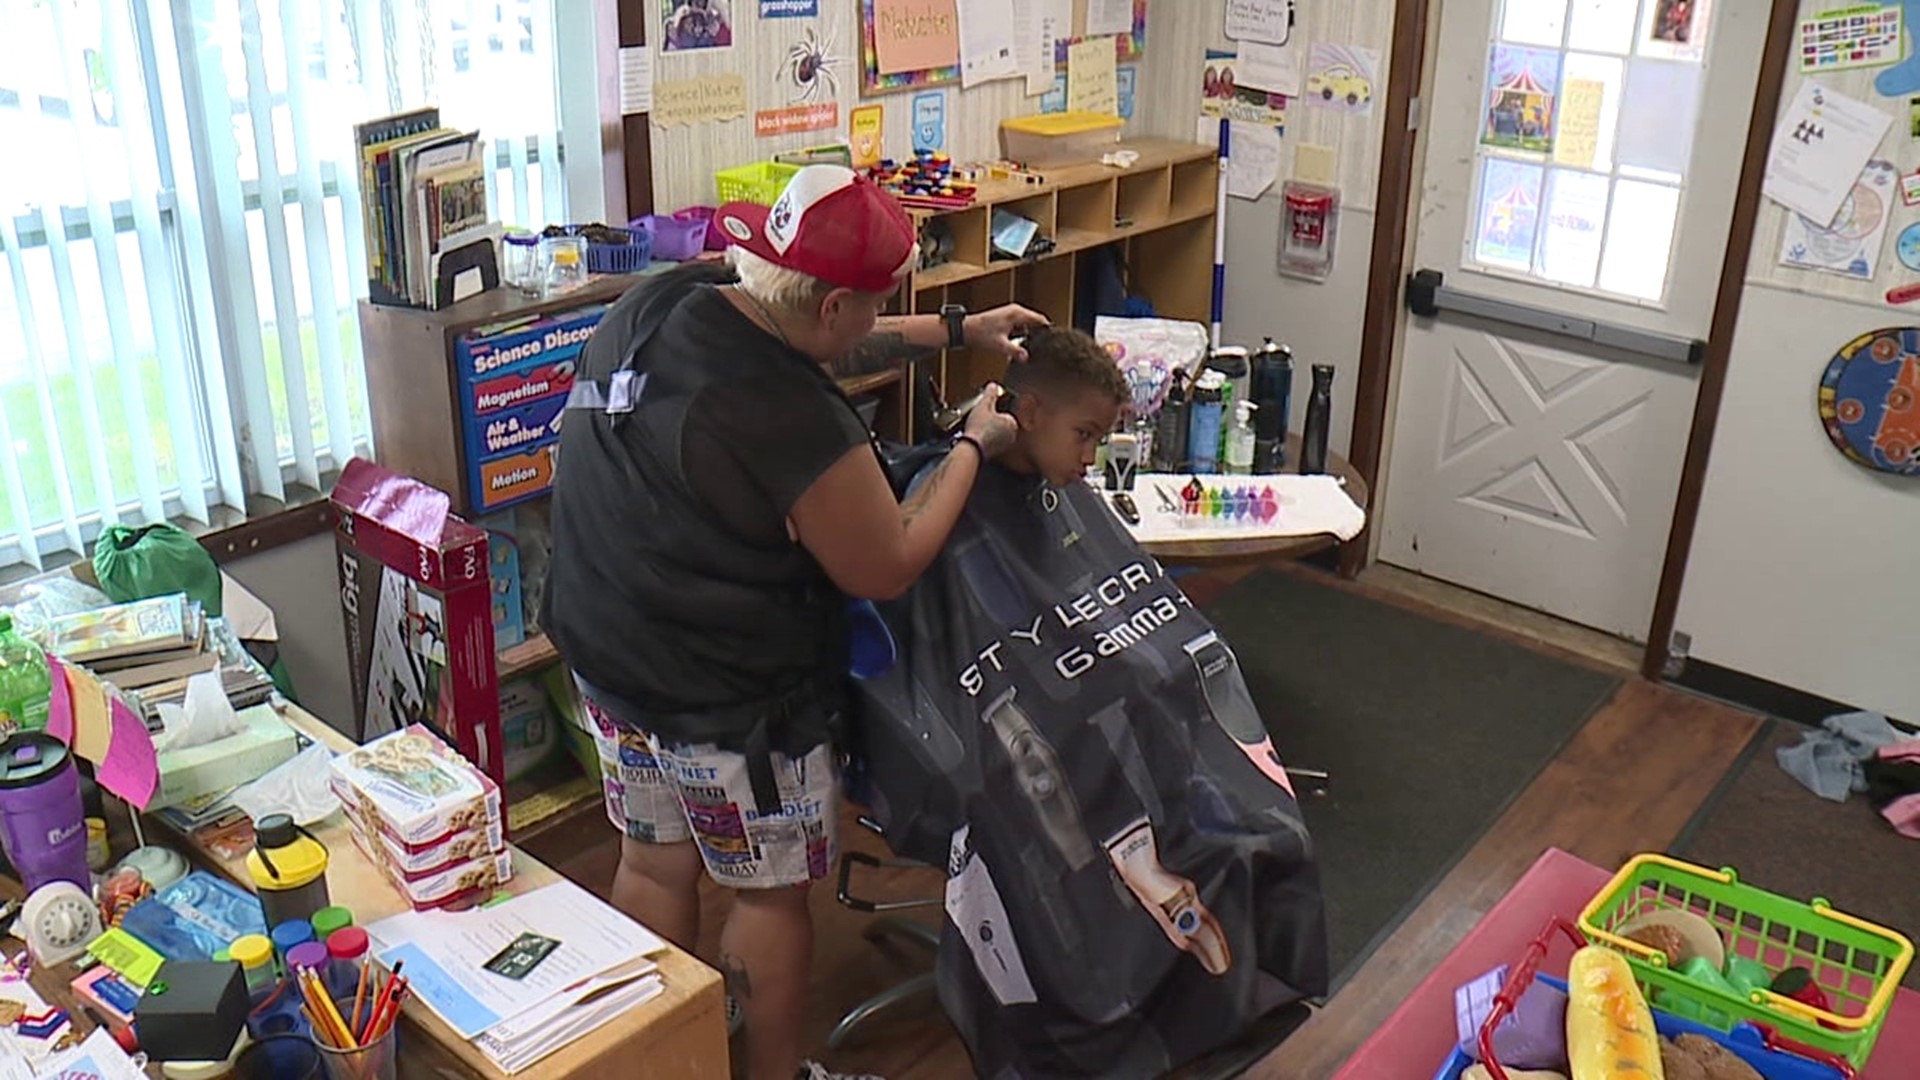 A hairstylist with a heart, her business is called "Kind Cutz" for a reason. The Scranton woman is now on the move with her talents and generosity.